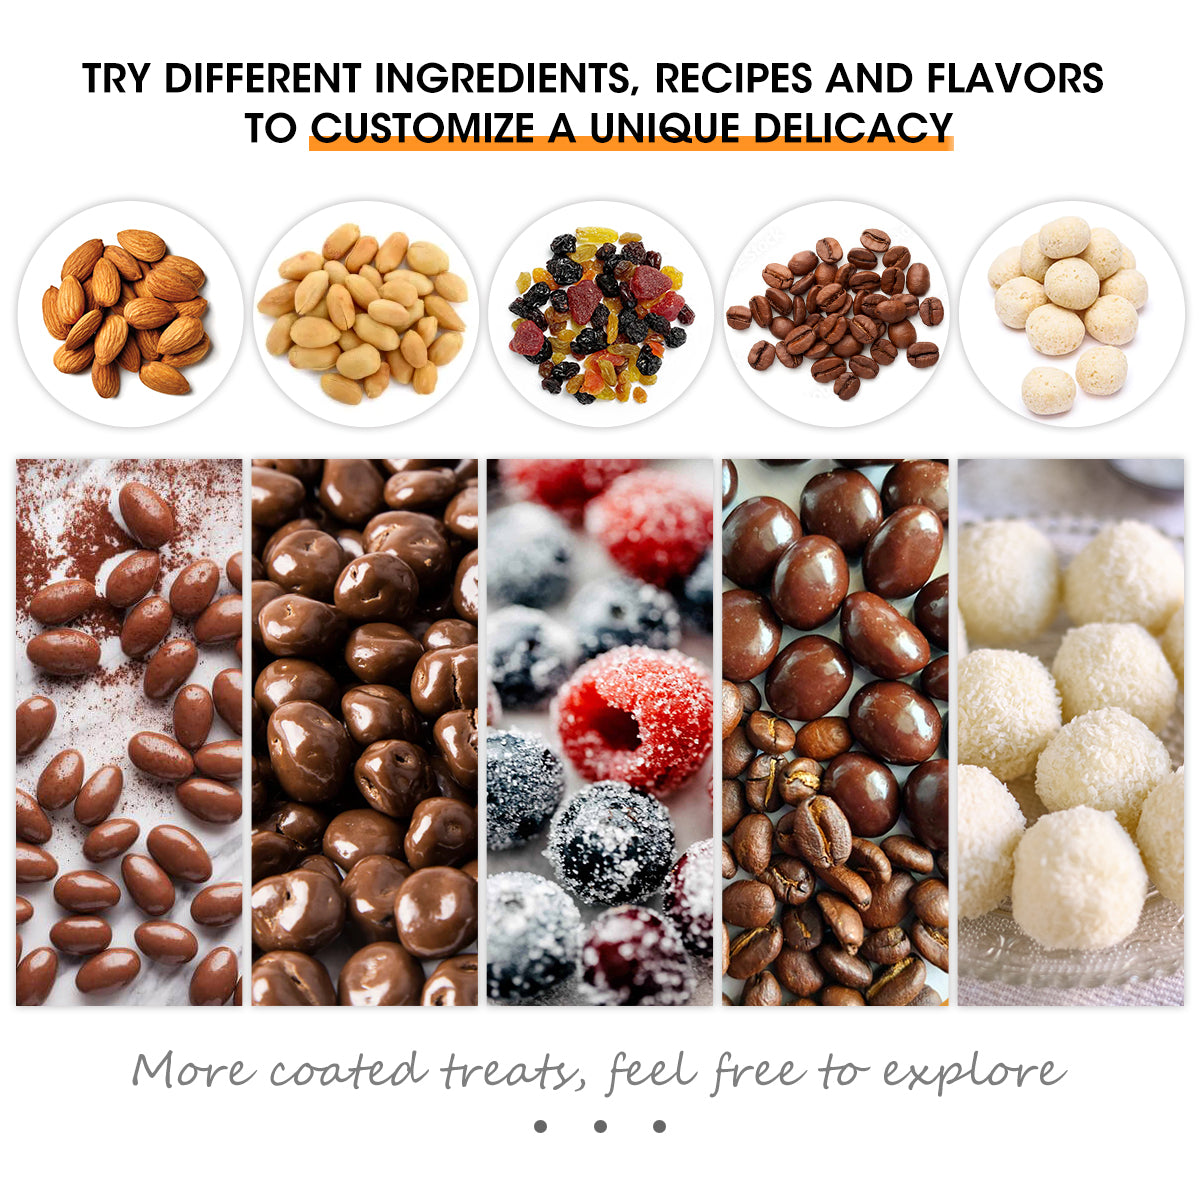 Snack coater is perfect for coating nuts, truffles, and a wide variety of confections with tempered chocolate and other coatings. It also sugars coats almonds, dried fruits, and cereals turning them into succulent dragees.